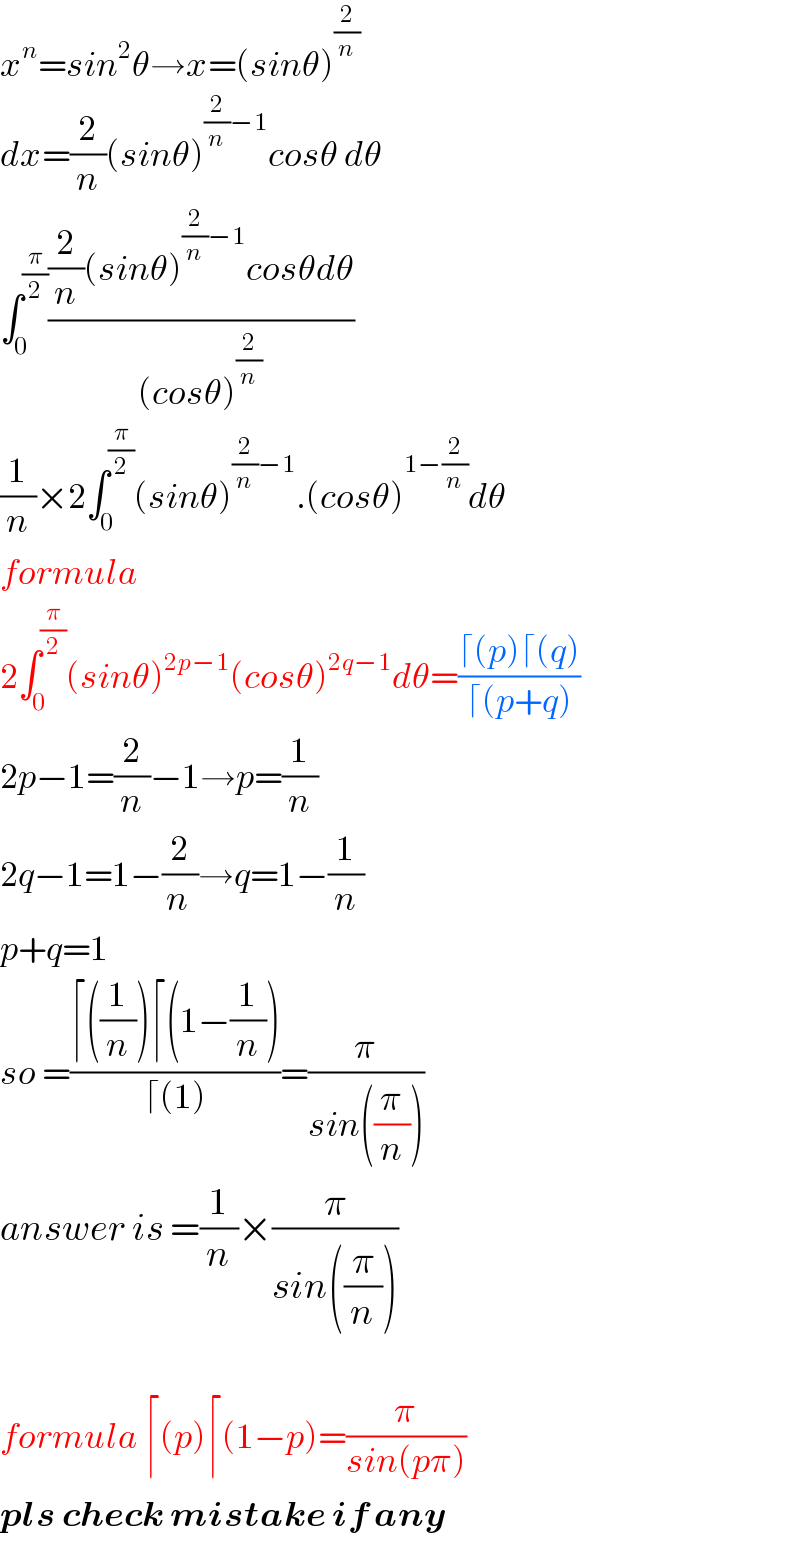 x^n =sin^2 θ→x=(sinθ)^(2/n)   dx=(2/n)(sinθ)^((2/n)−1) cosθ dθ  ∫_0 ^(π/2) (((2/n)(sinθ)^((2/n)−1) cosθdθ)/((cosθ)^(2/n) ))  (1/n)×2∫_0 ^(π/2) (sinθ)^((2/n)−1) .(cosθ)^(1−(2/n)) dθ  formula   2∫_0 ^(π/2) (sinθ)^(2p−1) (cosθ)^(2q−1) dθ=((⌈(p)⌈(q))/(⌈(p+q)))  2p−1=(2/n)−1→p=(1/n)  2q−1=1−(2/(n ))→q=1−(1/n)  p+q=1  so =((⌈((1/n))⌈(1−(1/n)))/(⌈(1)))=(π/(sin((π/n))))  answer is =(1/n)×(π/(sin((π/n))))    formula ⌈(p)⌈(1−p)=(π/(sin(pπ)))  pls check mistake if any  